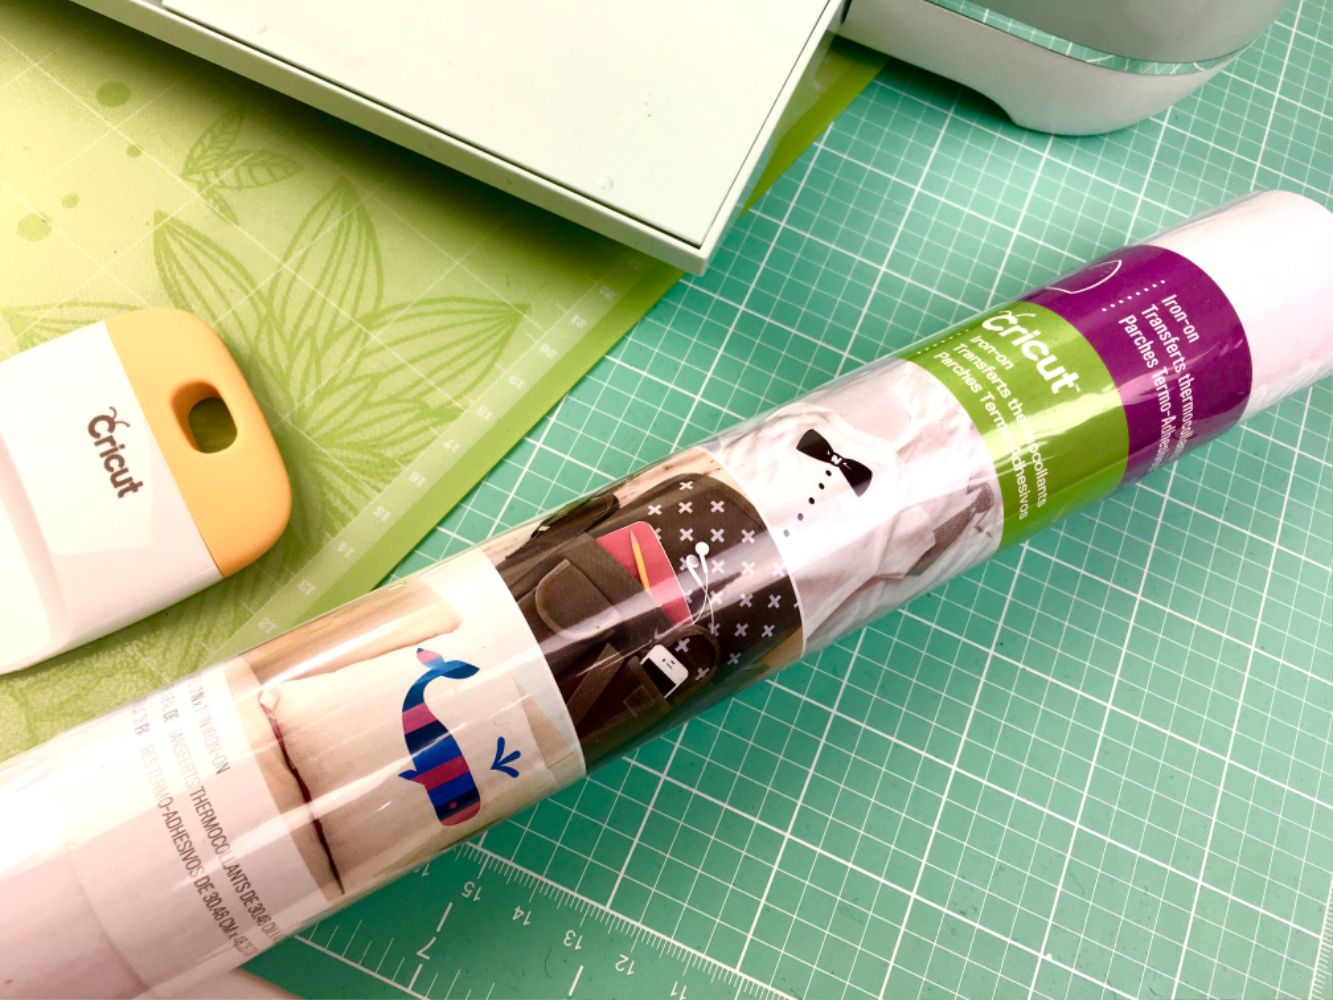 How to Use Iron-On Vinyl with Cricut Explore Air 2